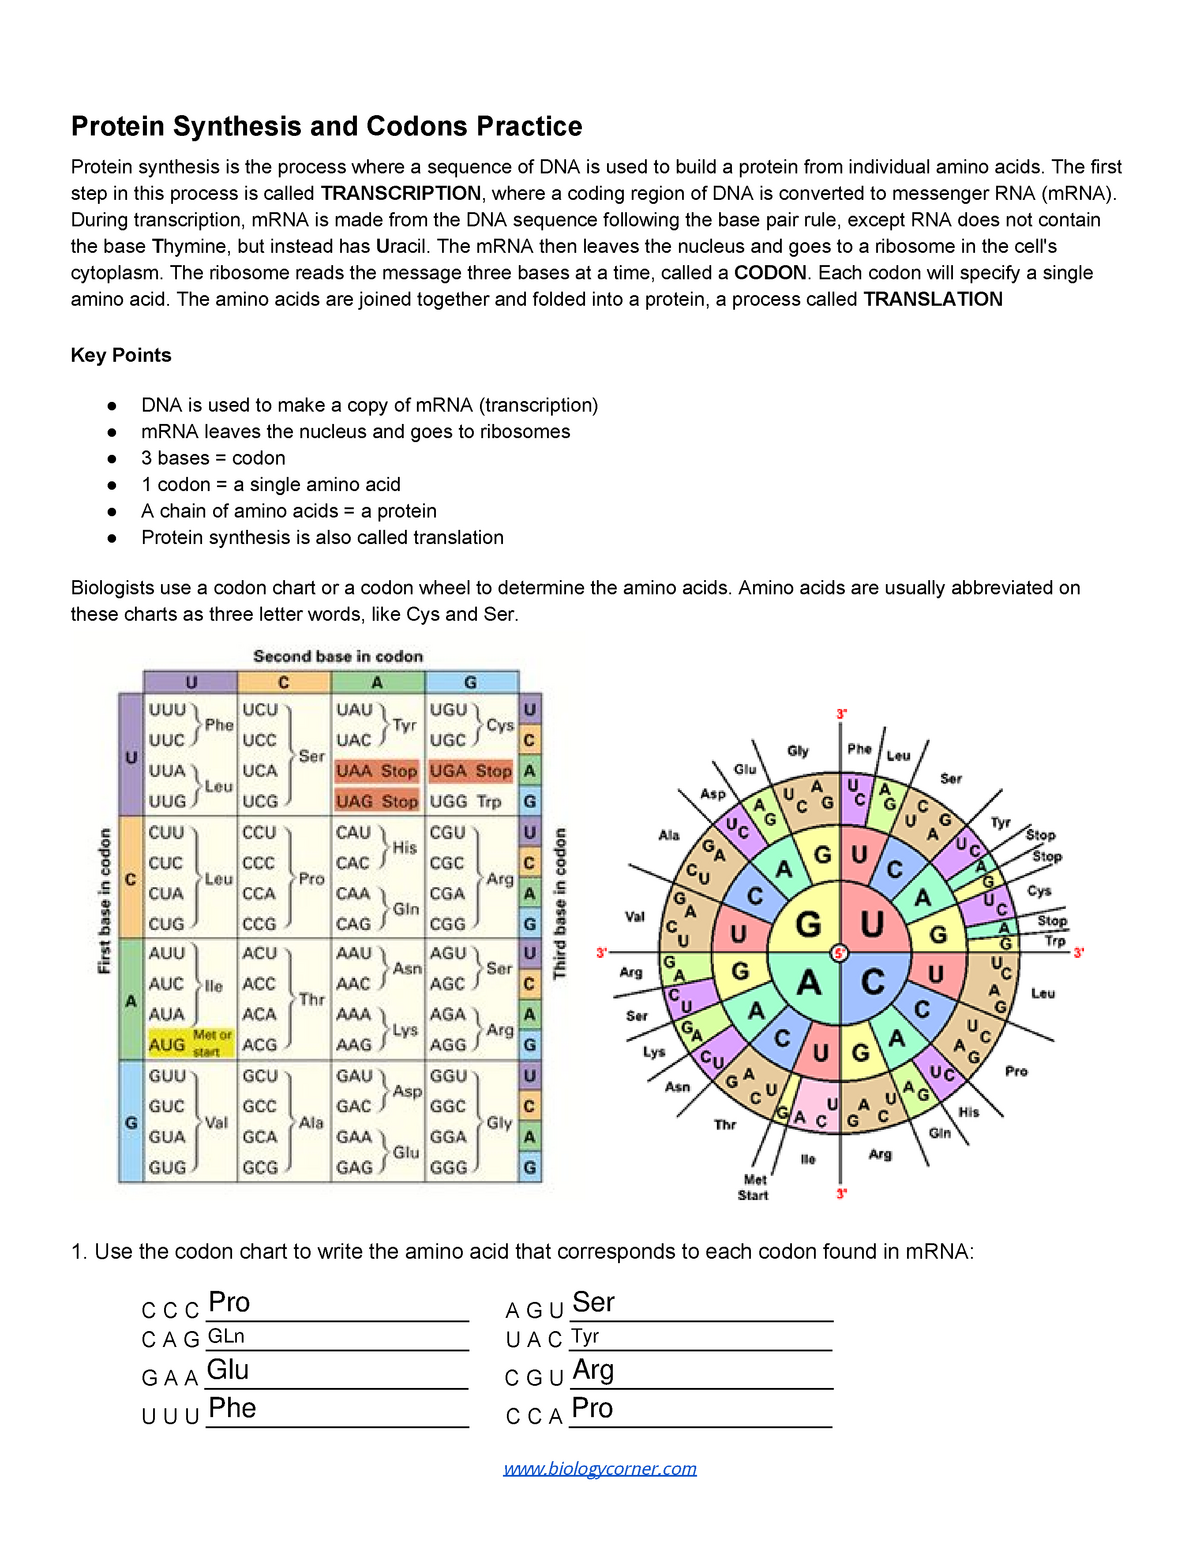 Protein Synthesis and Codons Practice fillabe-21 - Protein With Regard To Protein Synthesis Practice Worksheet